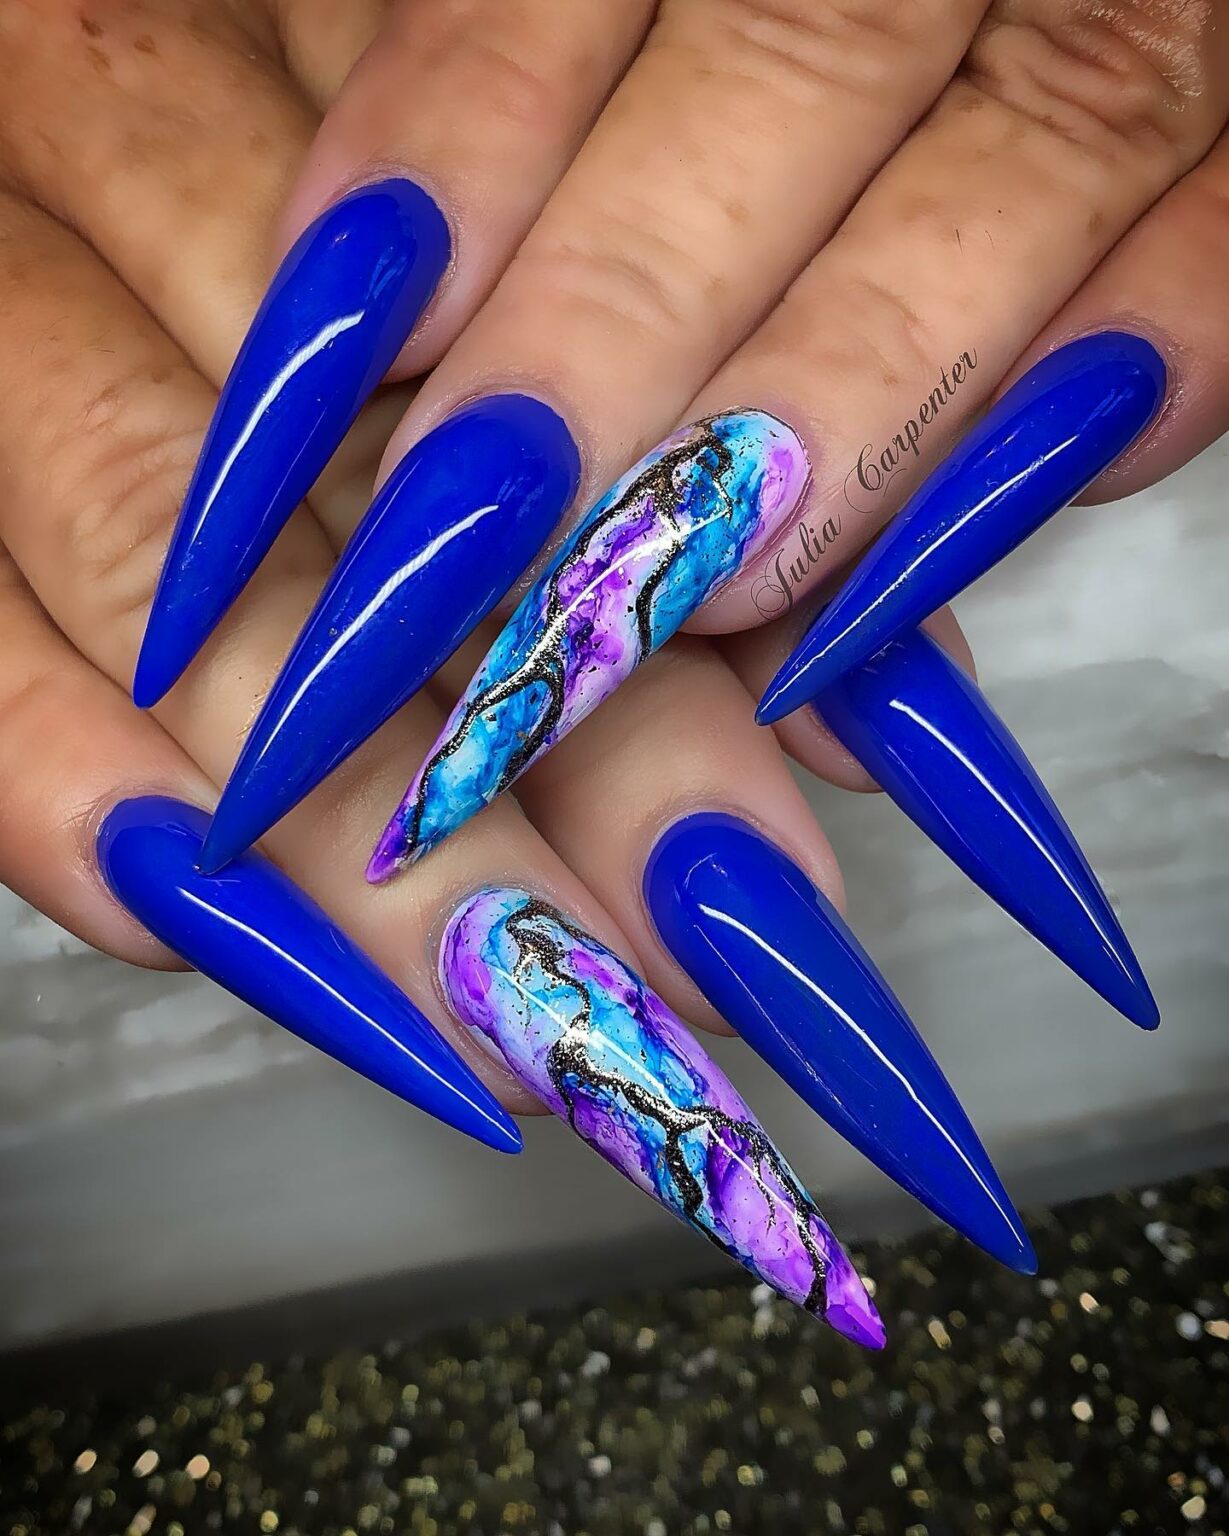 37+ Designs For Neon Blue Nails That Will Turn Heads - Nail Designs Daily